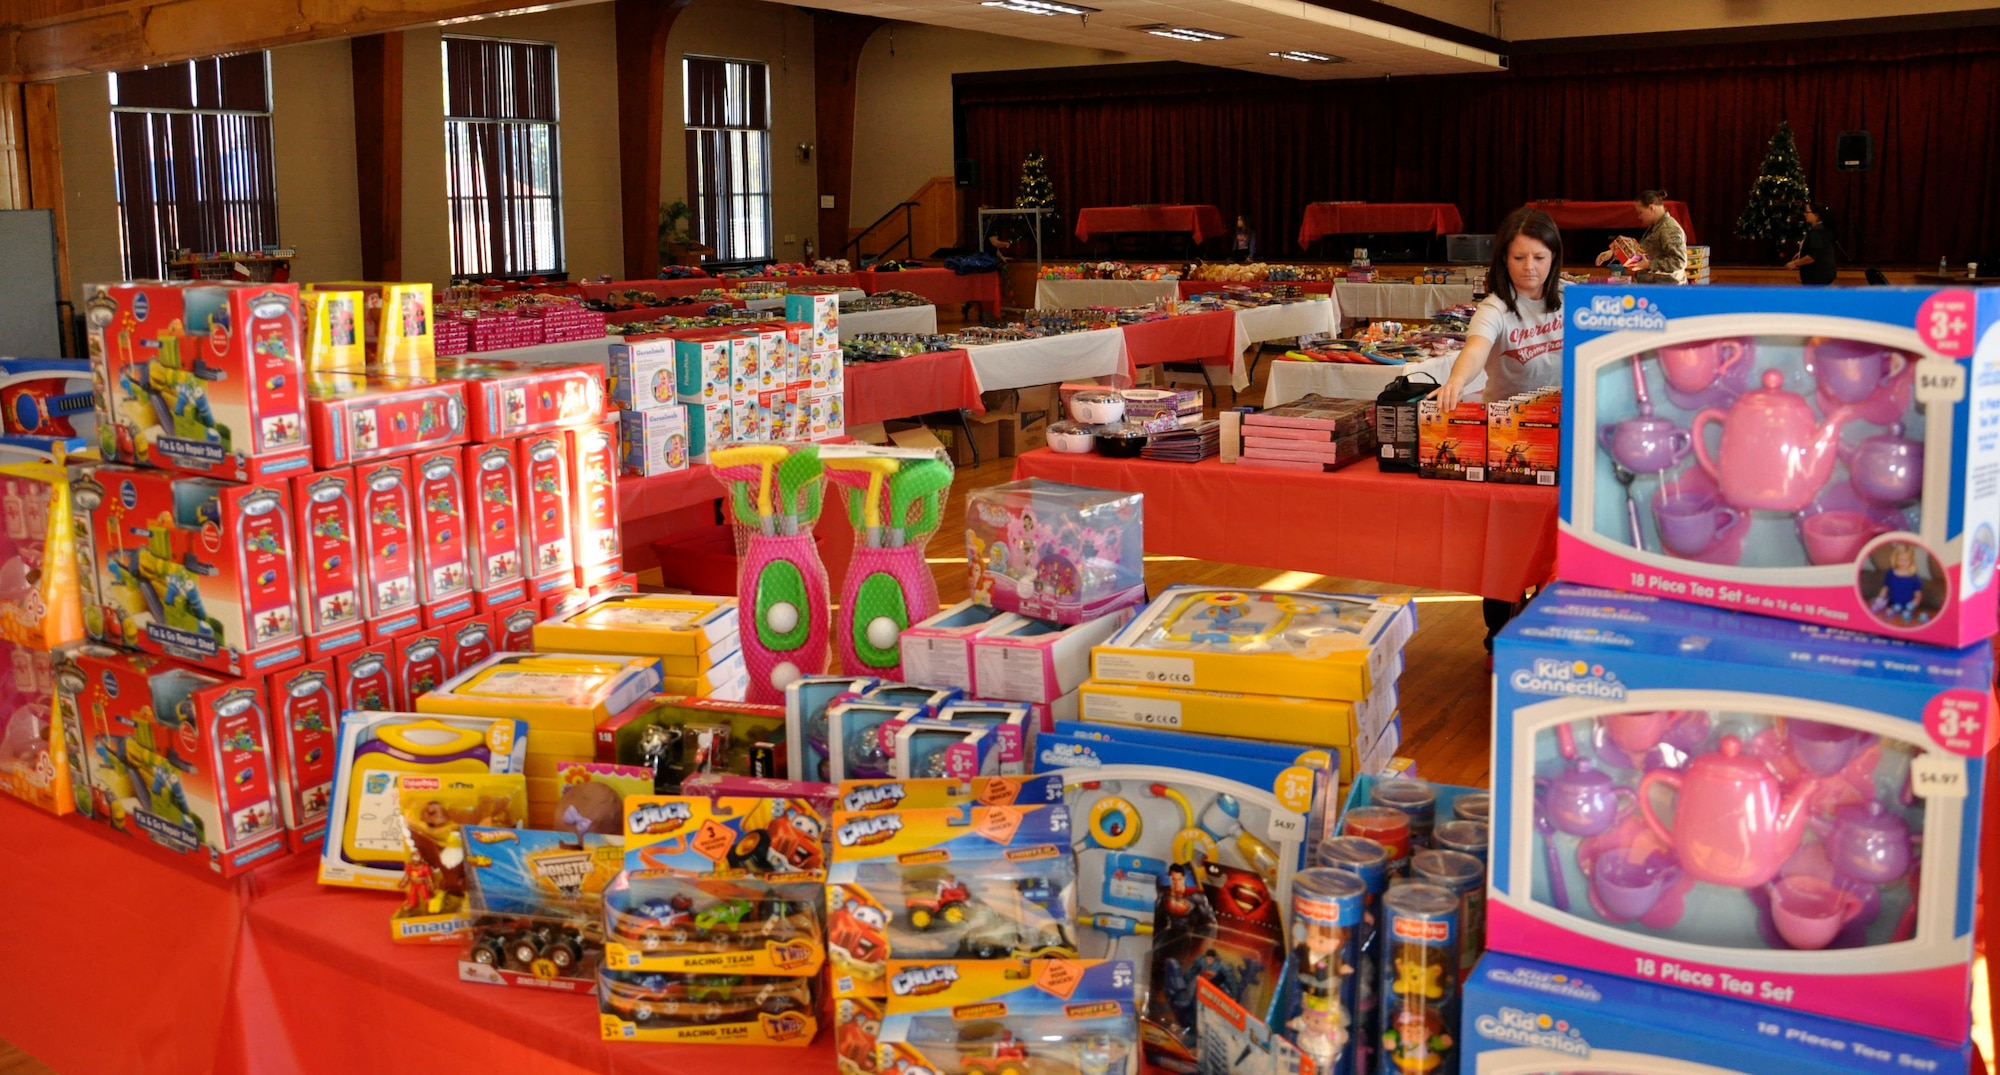 Approximately 6,000 toys were distributed to Airmen ranking E-6 and below Dec. 17, 2013, during Operation Homefront at Little Rock Air Force Base, Ark. This is the second year Operation Homefront has donated to Airmen at the Rock.  (U.S. Air Force photo by Senior Airman Regina Agoha)